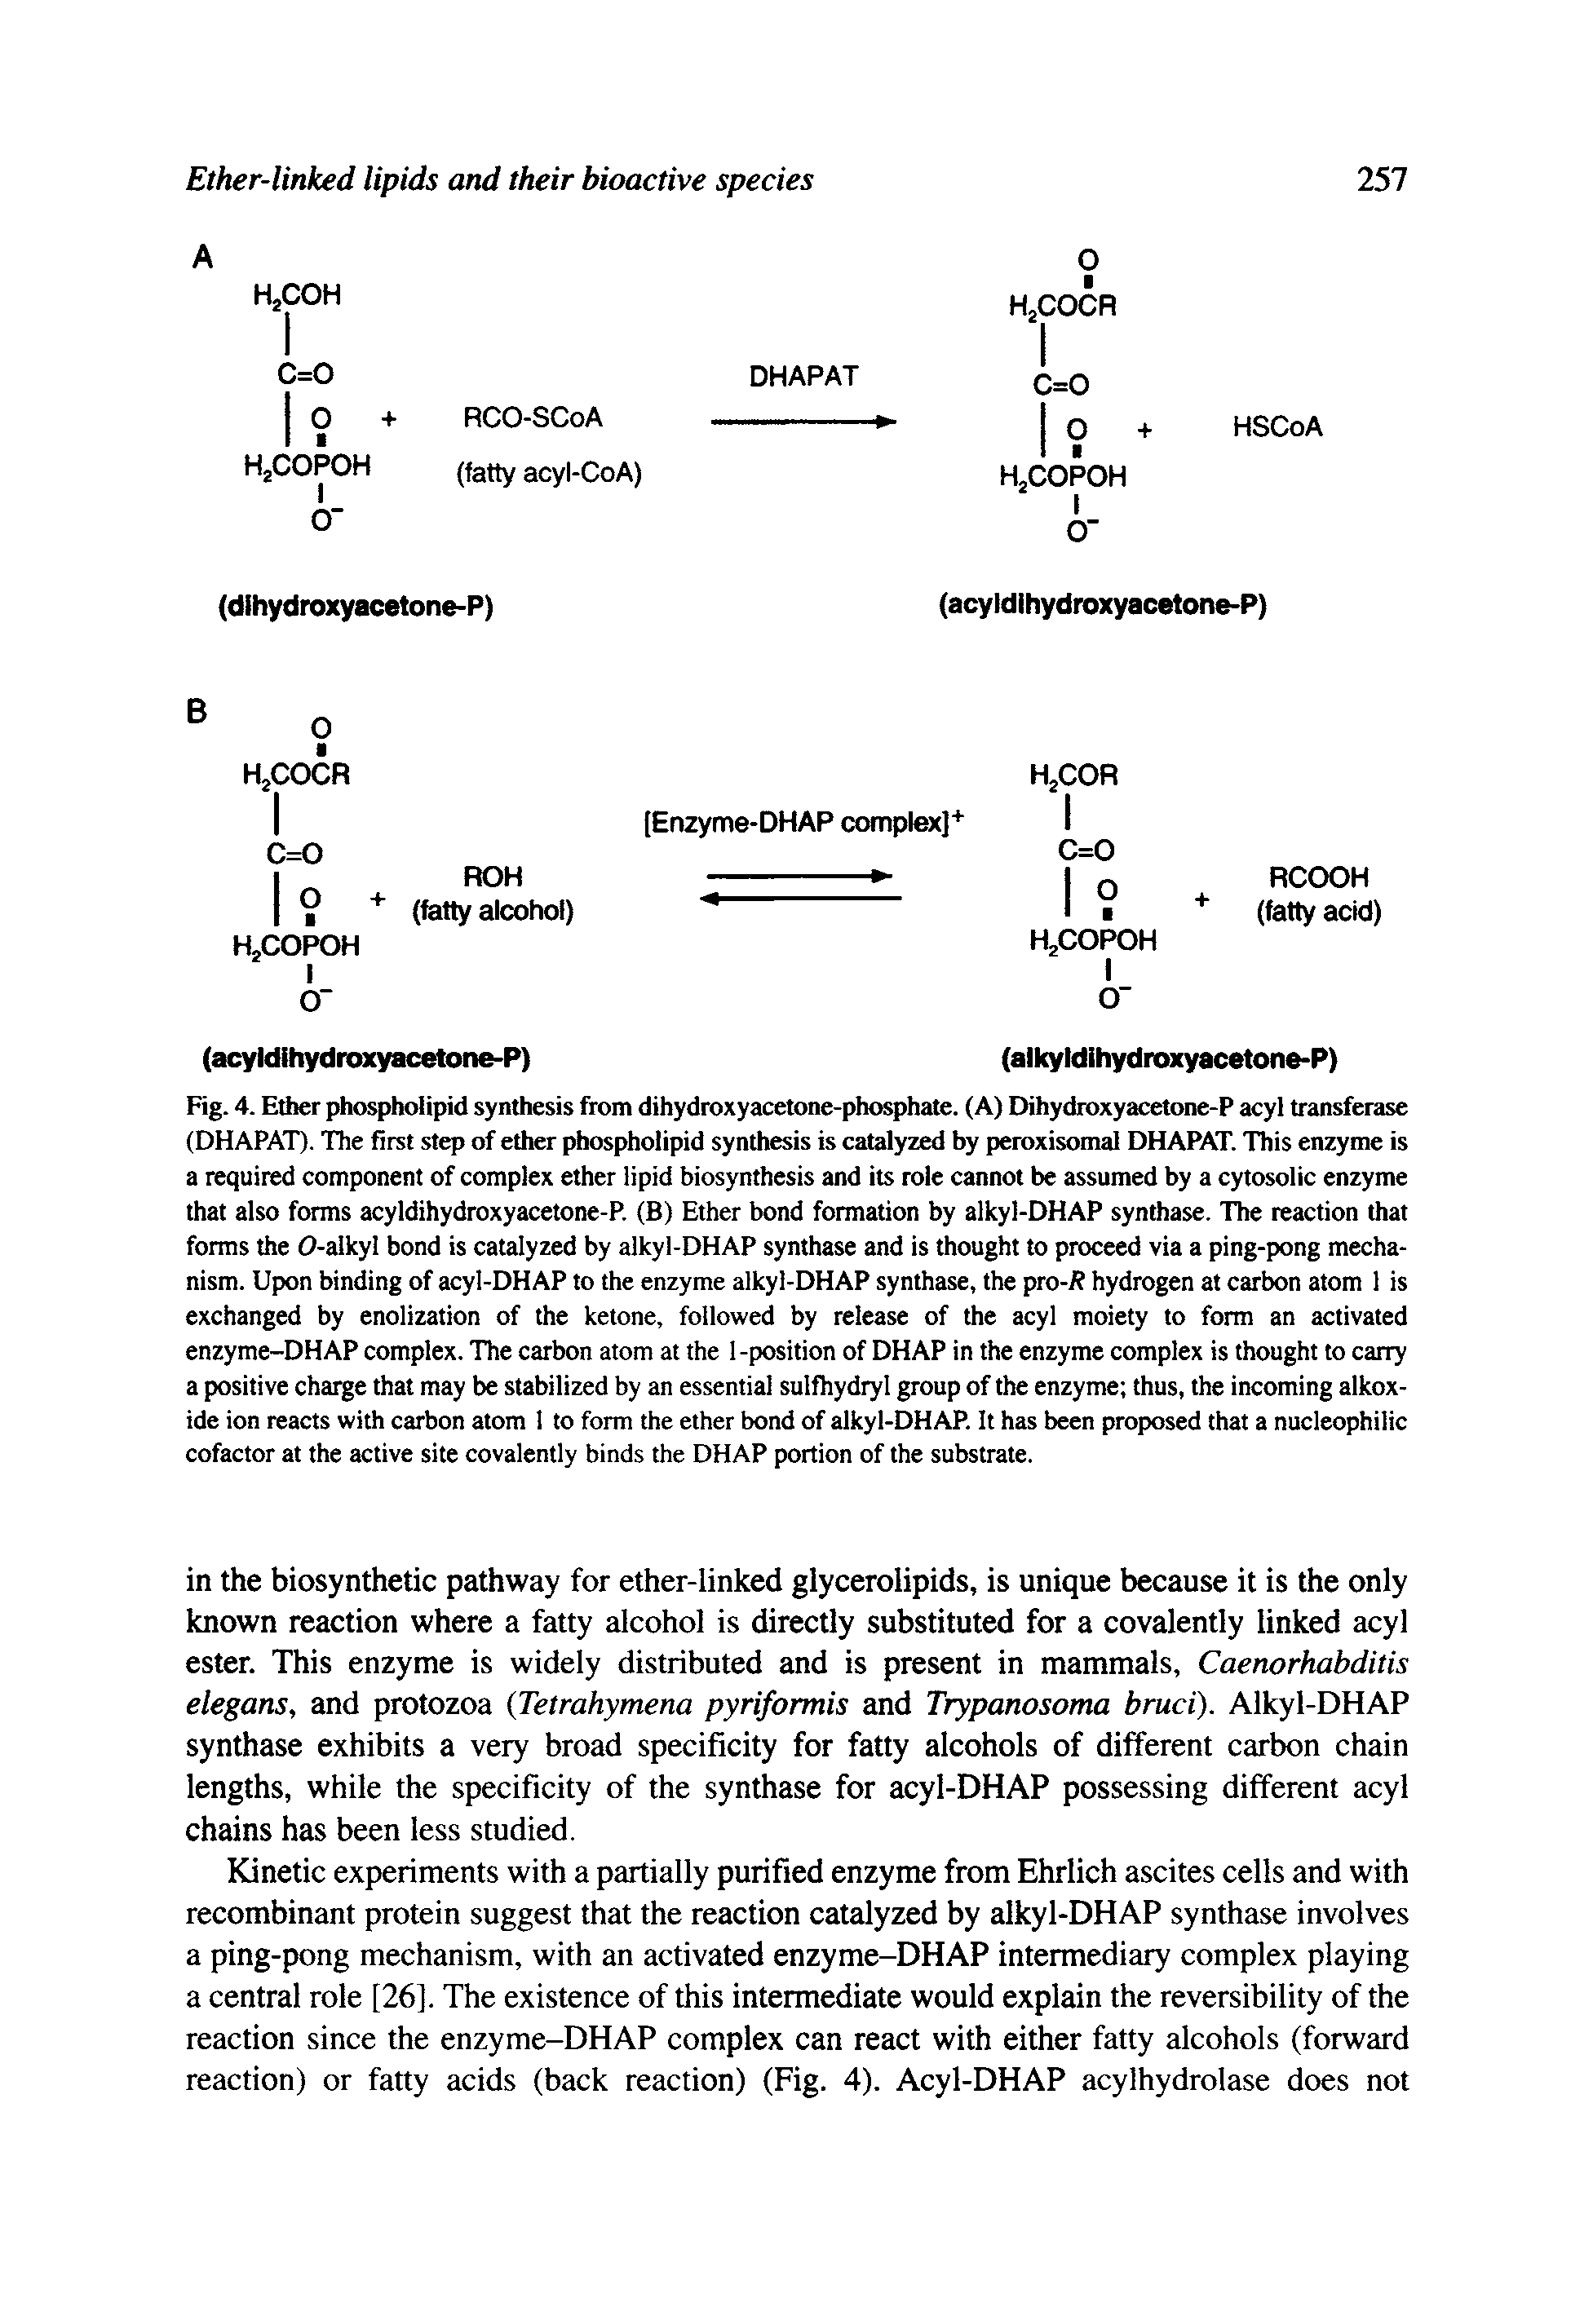 Fig. 4. Ether phospholipid synthesis from dihydroxyacetone-phosphate. (A) Dihydroxyacetone-P acyl transferase (DHAPAT). The first step of ether phospholipid synthesis is catalyzed by peroxisomal DHAPAT. This enzyme is a required component of complex ether lipid biosynthesis and its role cannot be assumed by a cytosolic enzyme that also forms acyldihydroxyacetone-P. (B) Ether bond formation by alkyl-DHAP synthase. The reaction that forms the 0-alkyl bond is catalyzed by alkyl-DHAP synthase and is thought to proceed via a ping-pong mechanism. Upon binding of acyl-DHAP to the enzyme alkyl-DHAP synthase, the pro-f hydrogen at carbon atom 1 is exchanged by enolization of the ketone, followed by release of the acyl moiety to form an activated enzyme-DHAP complex. The carbon atom at the 1-position of DHAP in the enzyme complex is thought to carry a positive charge that may be stabilized by an essential sulfhydryl group of the enzyme thus, the incoming alkox-ide ion reacts with carbon atom 1 to form the ether bond of alkyl-DHAP. It has been proposed that a nucleophilic cofactor at the active site covalently binds the DHAP portion of the substrate.